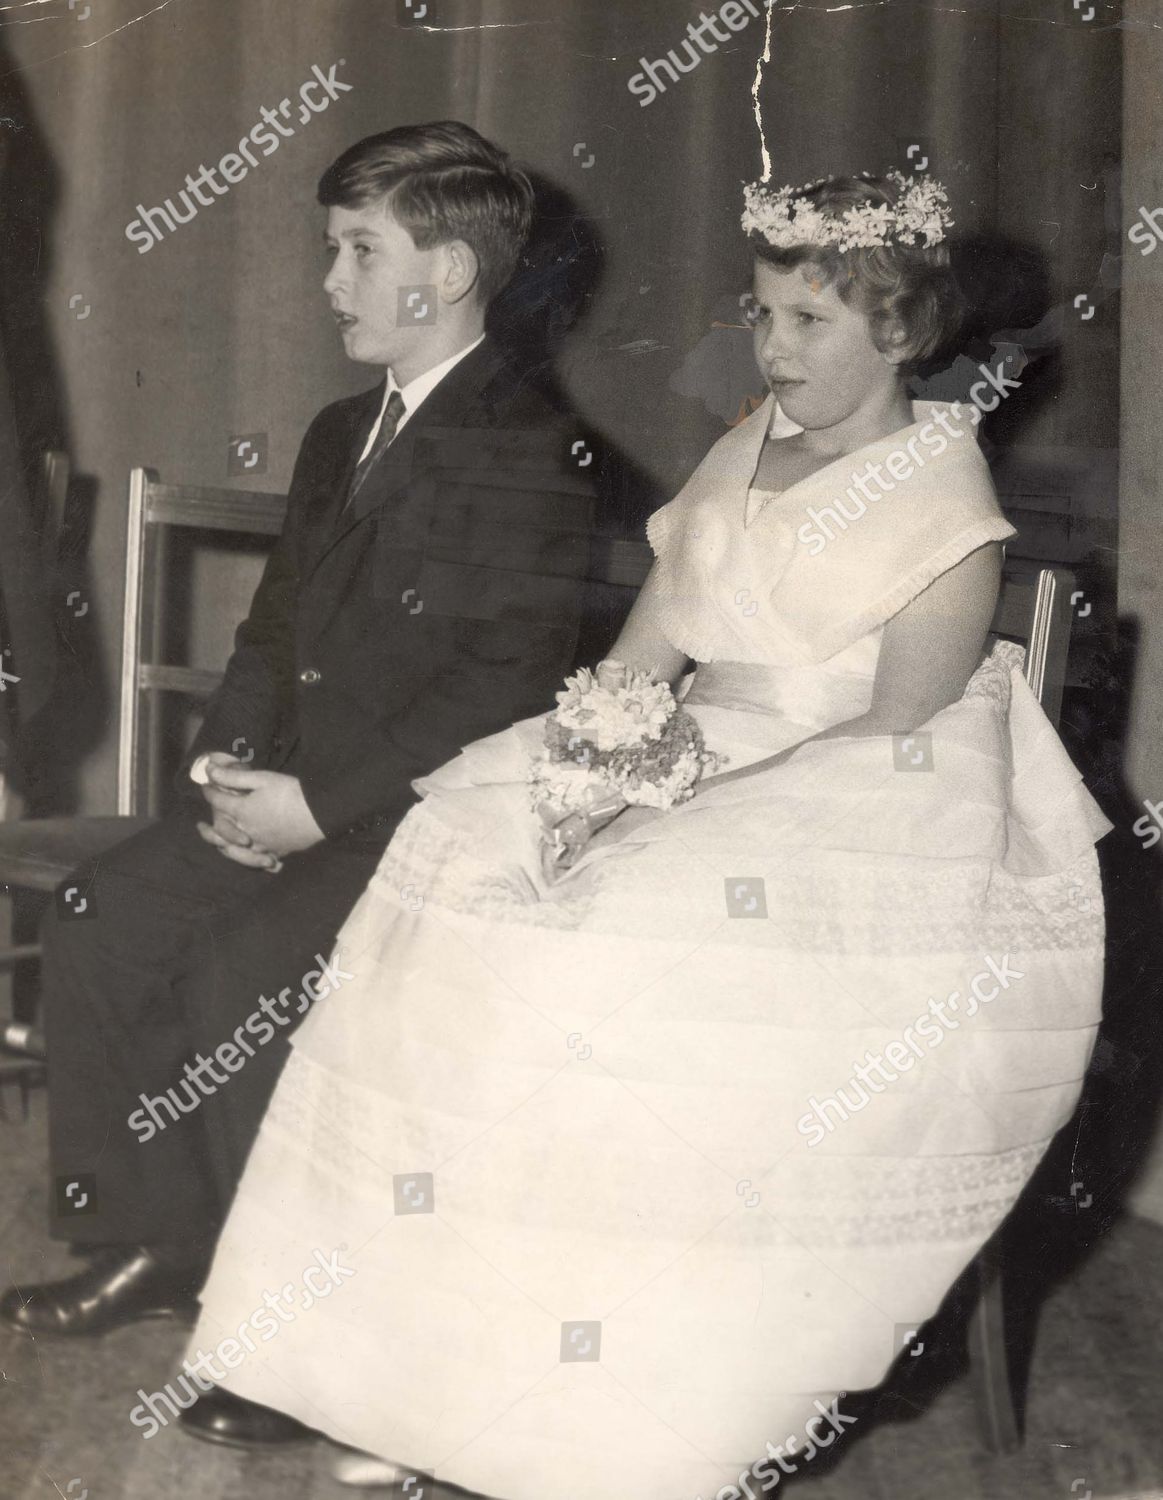 prince-of-wales-1960-1961-picture-shows-prince-of-wales-and-princess-anne-at-the-lady-pamela-mountbatten-david-hicks-wedding-reception-at-crossfield-hall-hampshire-shutterstock-editorial-8993435a.jpg